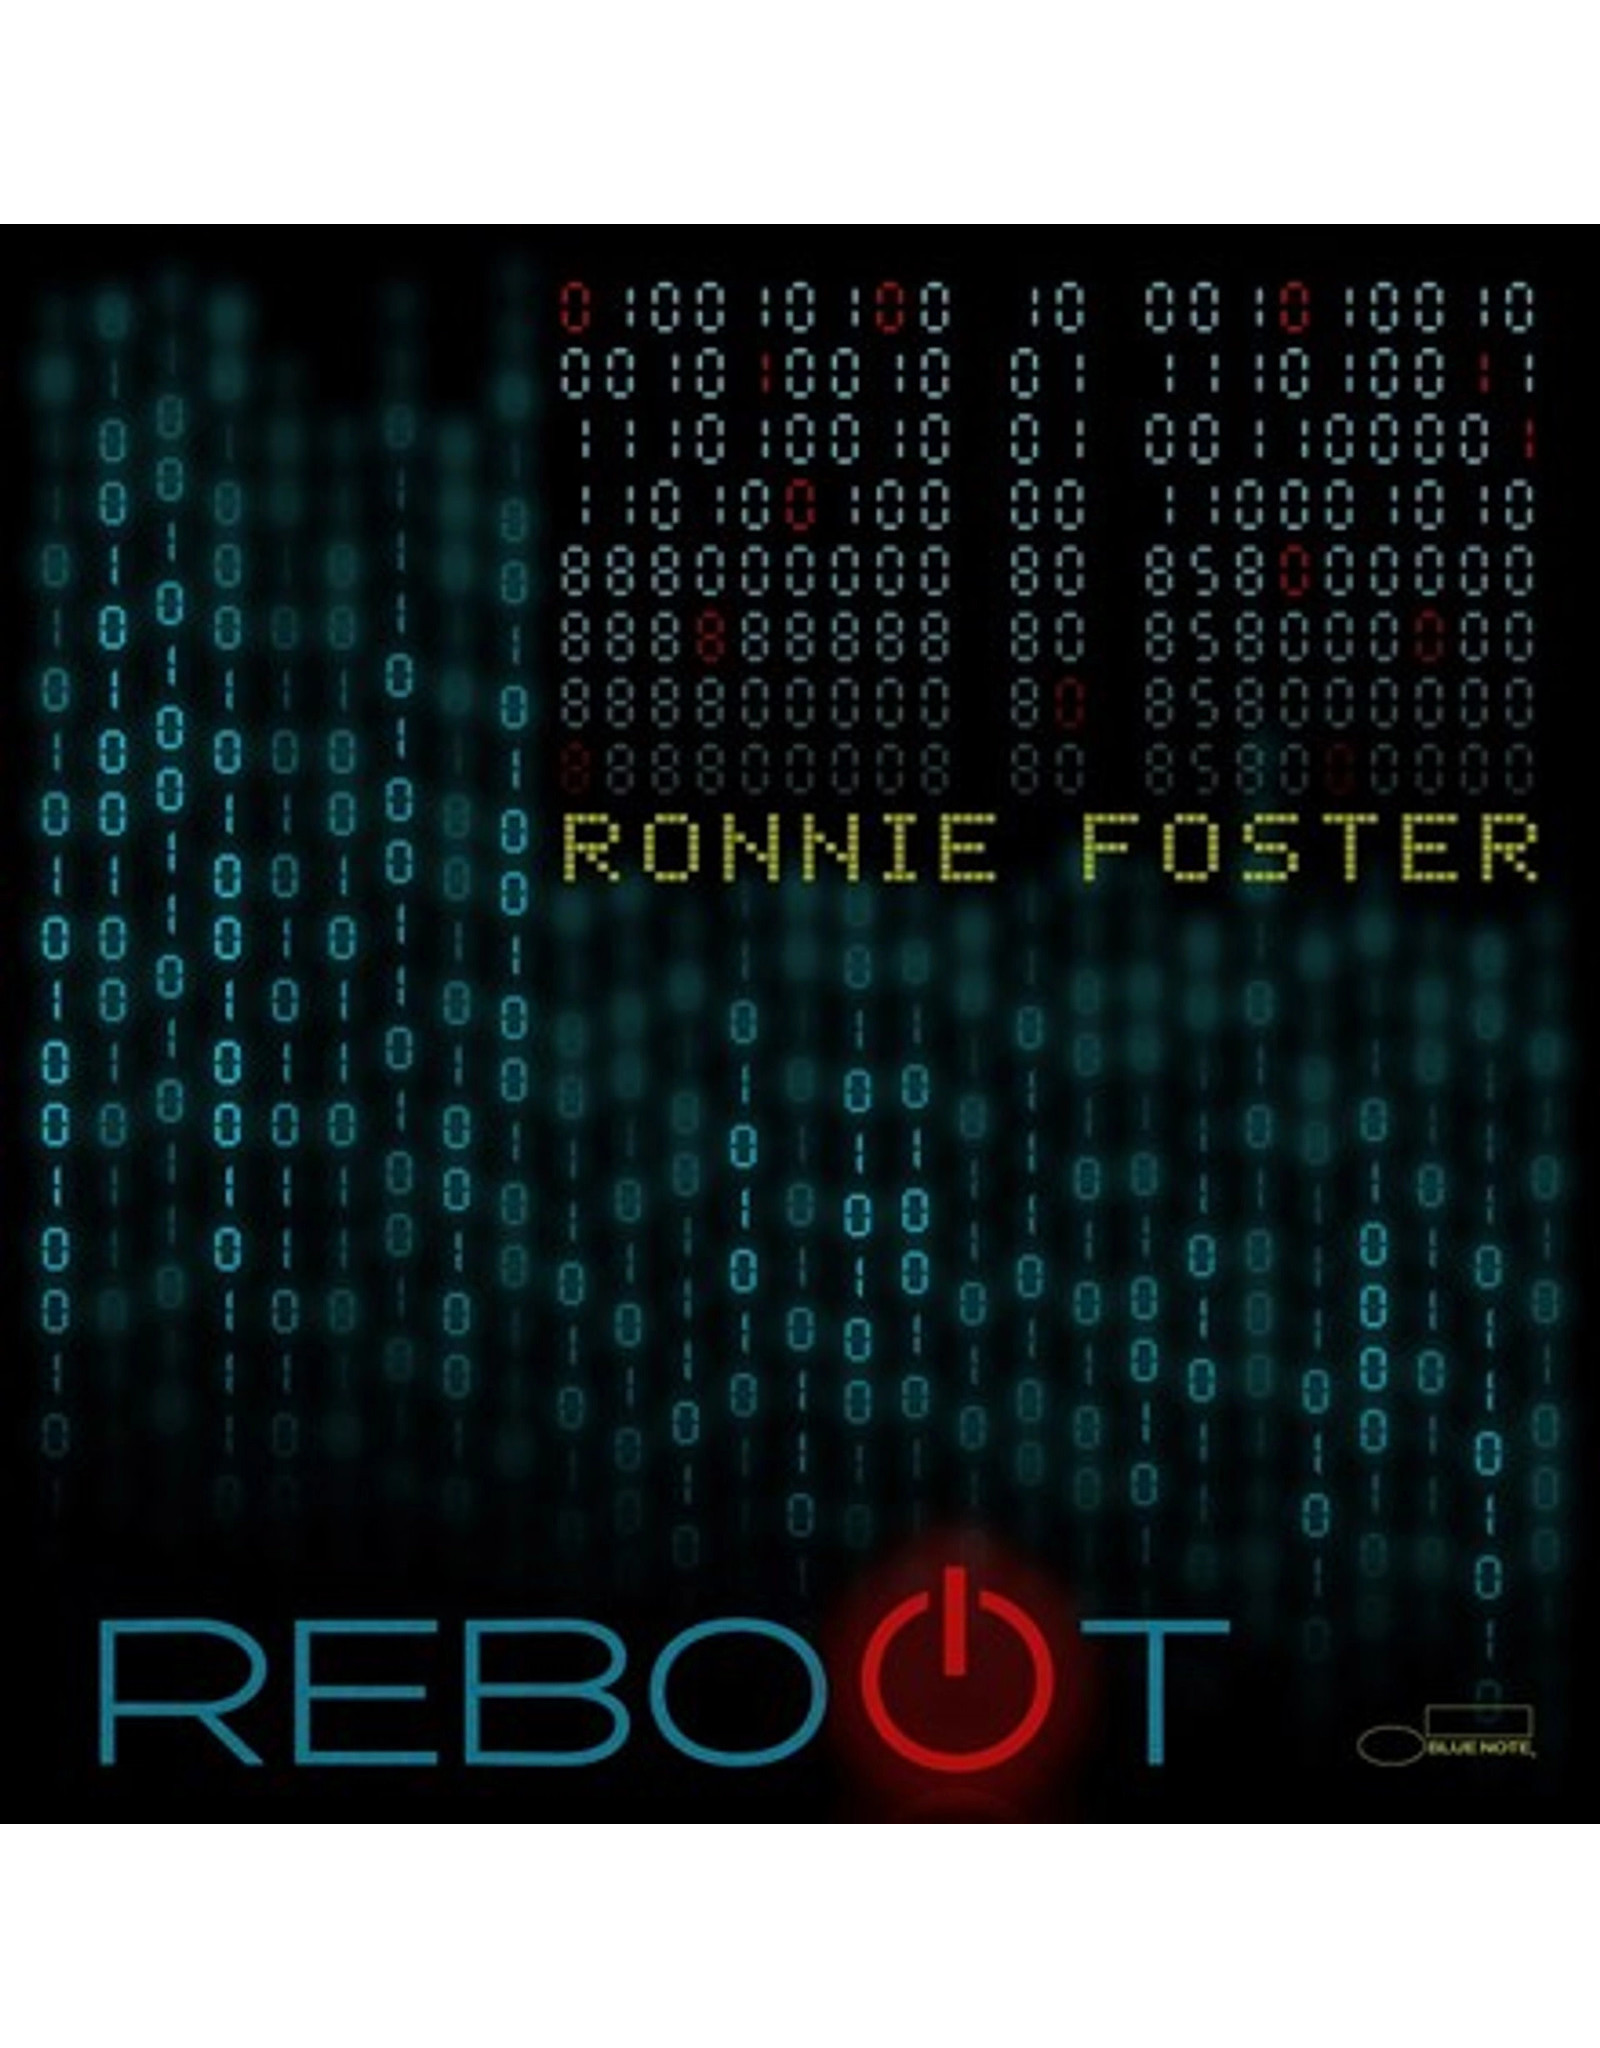 Blue Note Foster, Ronnie: Reboot LP